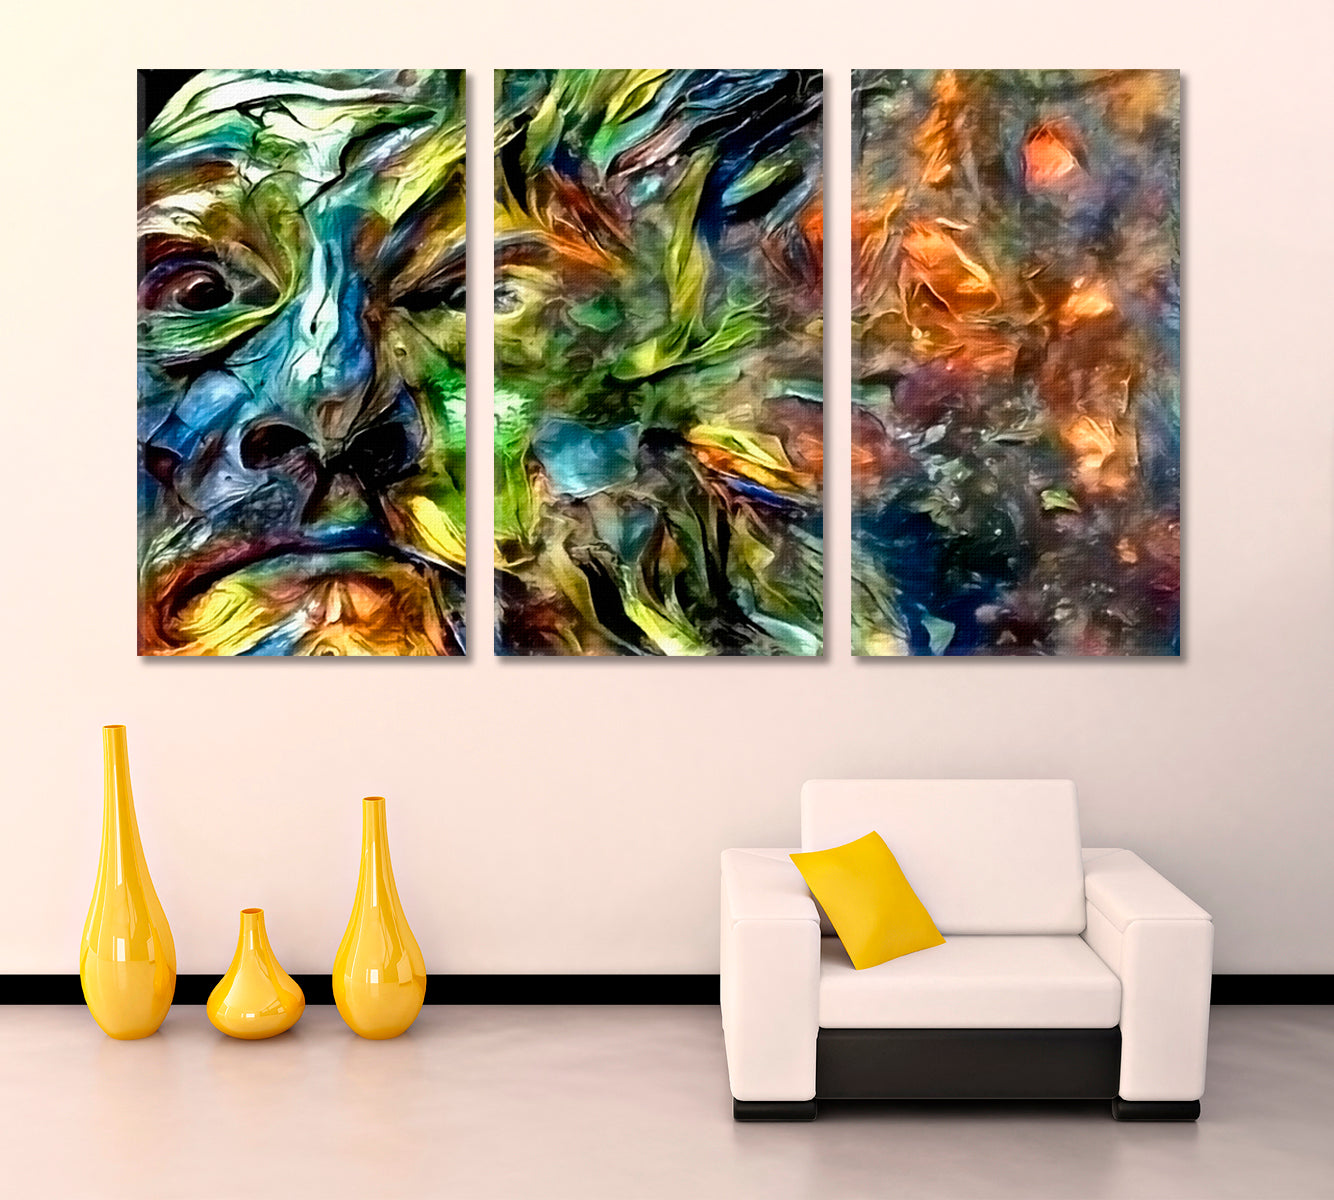 FACE OF NATURE  Contemporary Psychedelic Art Surreal Fantasy Large Art Print Décor Artesty 3 panels 36" x 24" 